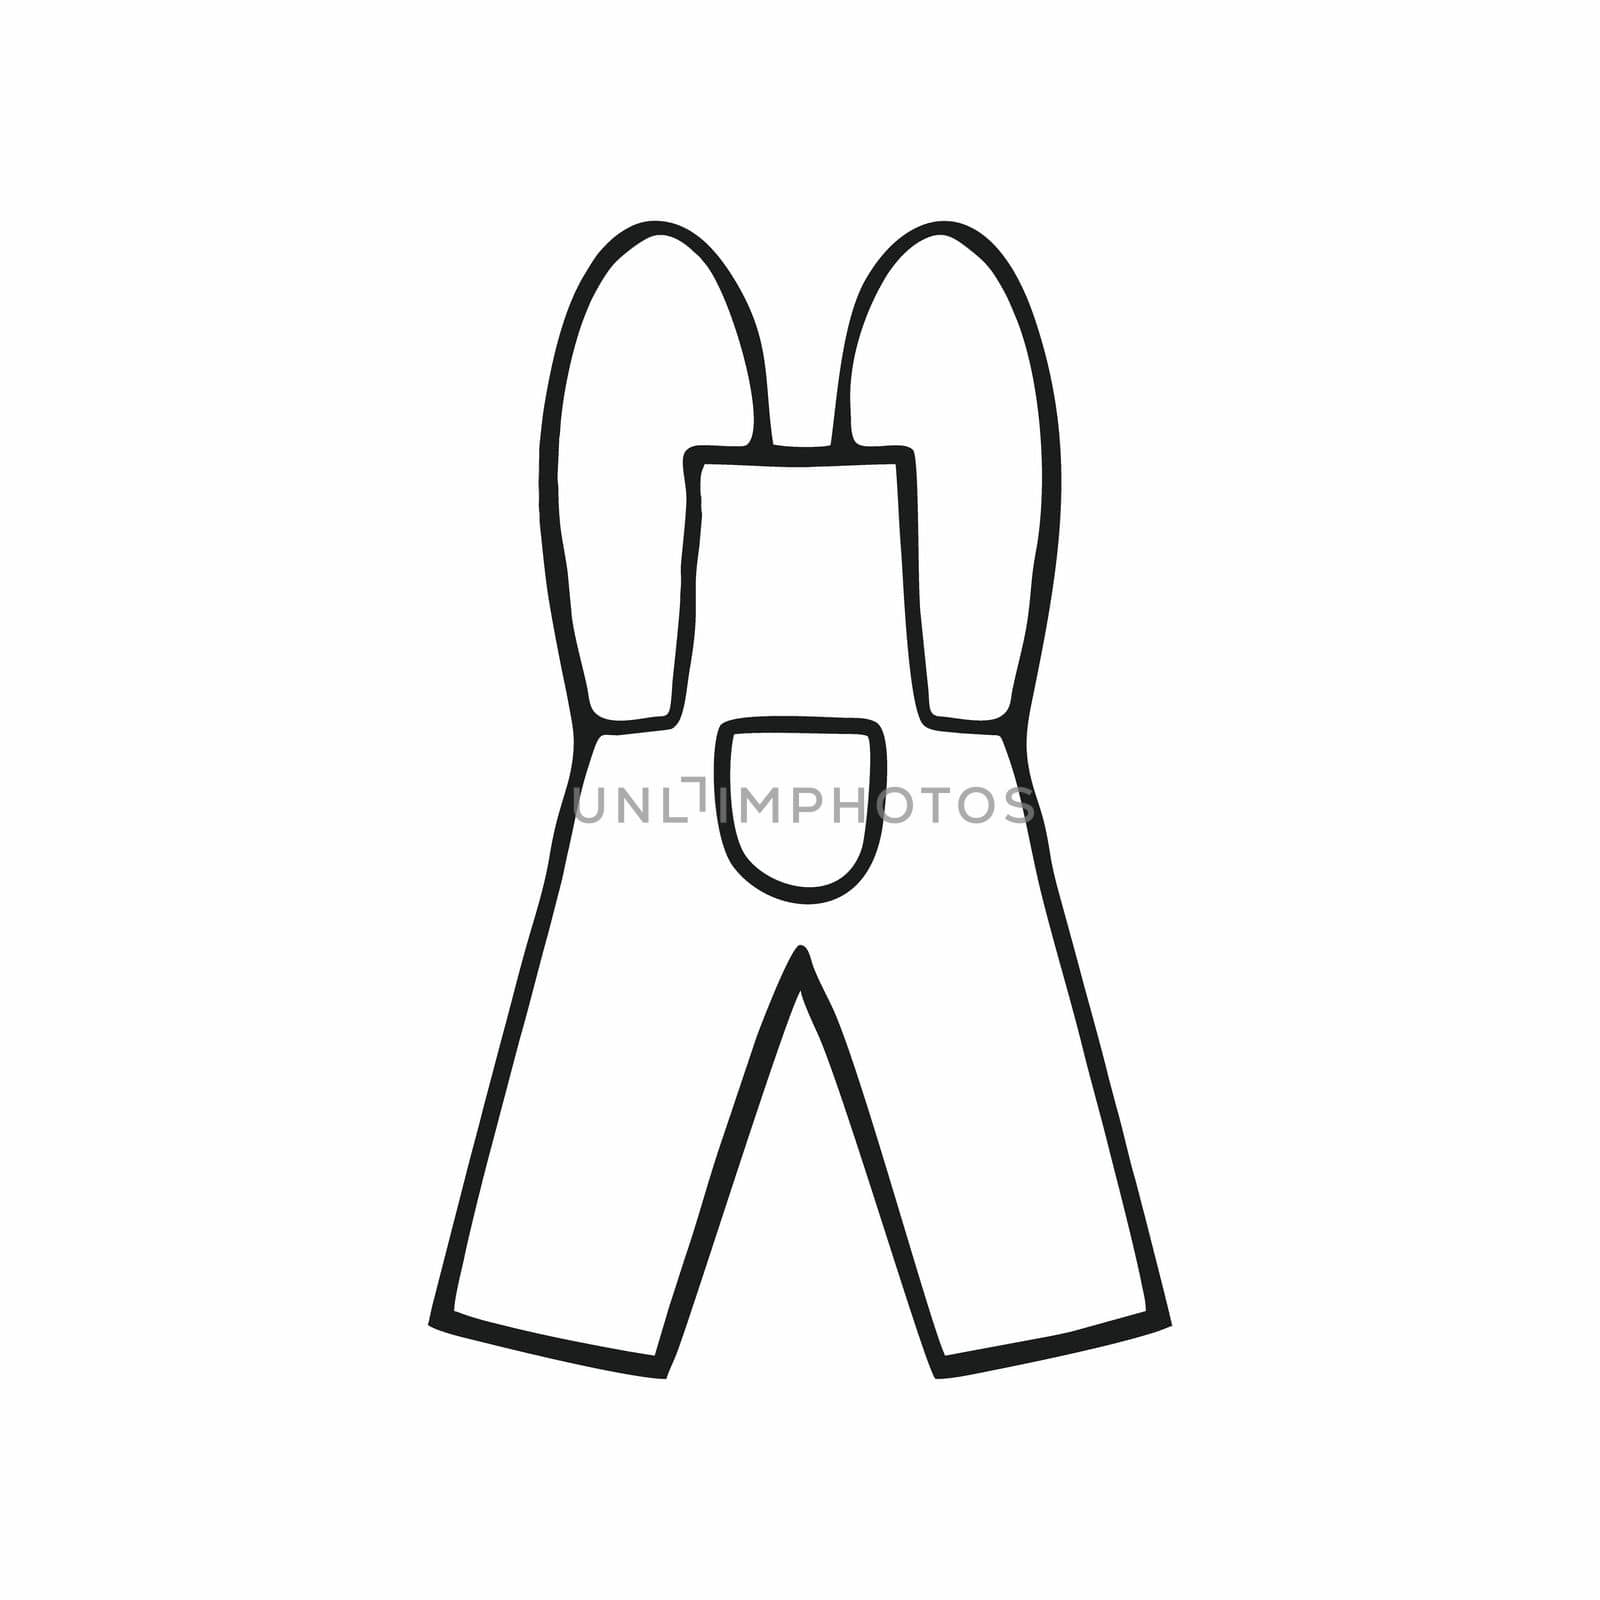 Children's jumpsuit with pants drawn by hand. Vector icon of children's clothing isolated on a white background. Contour Doodle illustration for stickers, booklets, and postcards. Things for newborns.